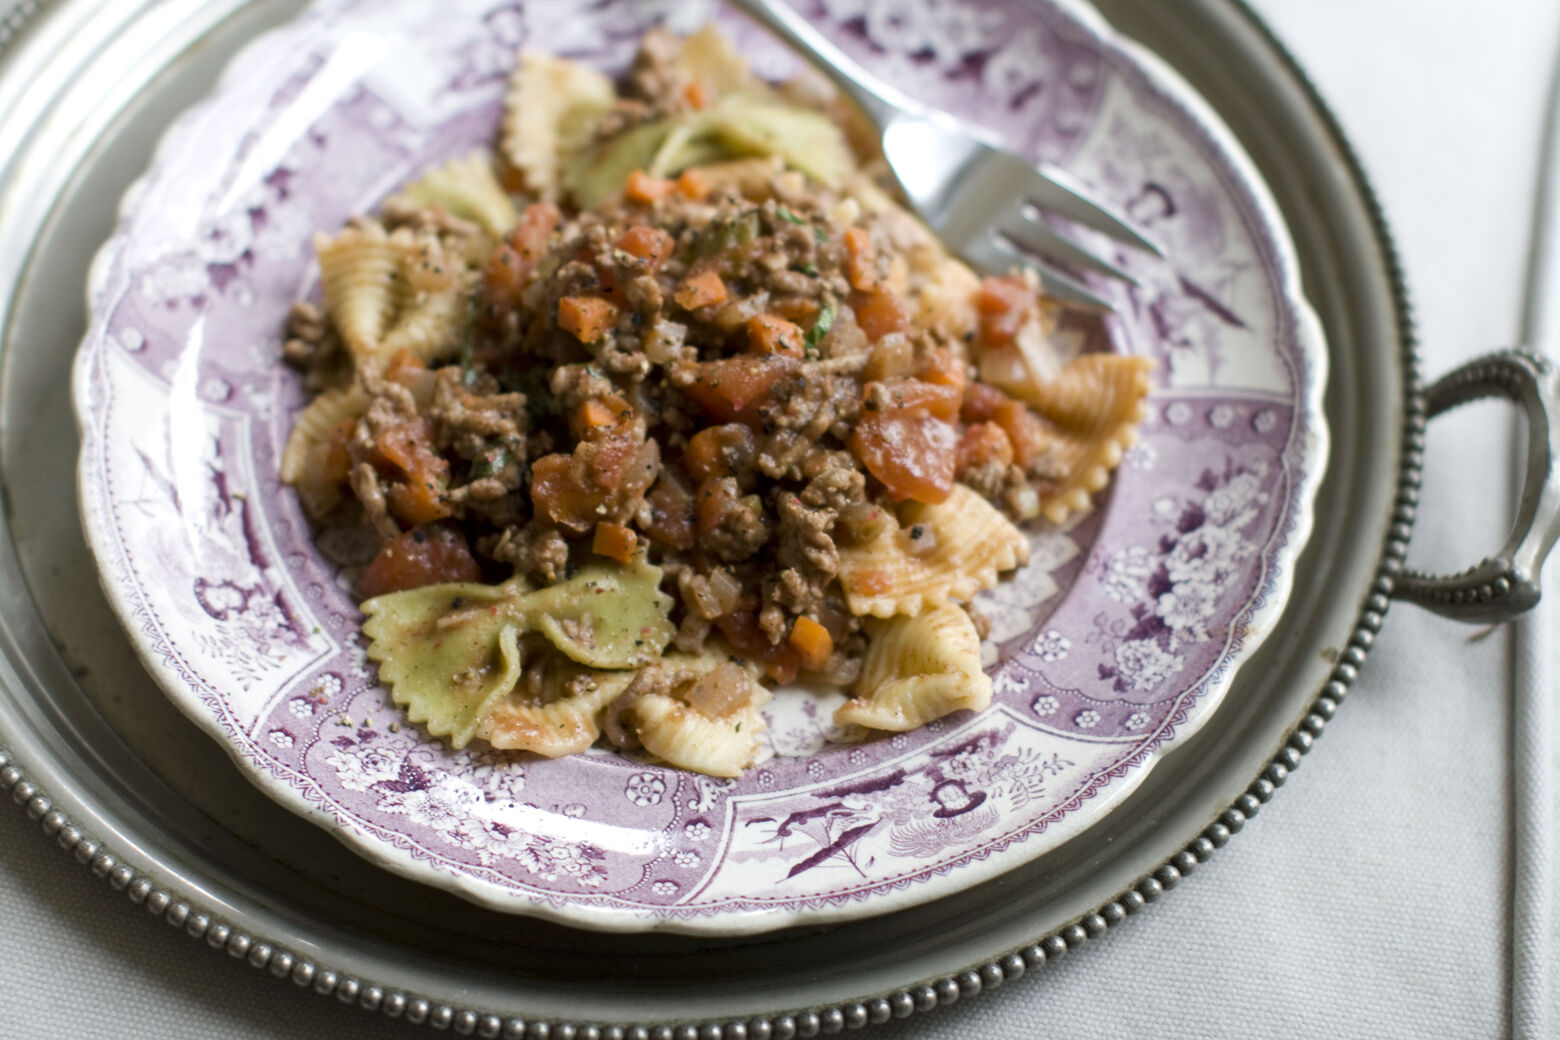 <h2><strong>Turkey Bolognese</strong></h2>
<p>If your taste buds have had it with all the traditional Thanksgiving flavors, try something Italian.</p>
<p><a href="https://www.foodnetwork.com/recipes/giada-de-laurentiis/turkey-bolognese-recipe-1944775" target="_blank" rel="noopener">The Food Network&#8217;s Giada De Laurentiis has a recipe for turkey Bolognese</a>. Her recipe favors the dark meat, if you have any left.</p>
<p>&nbsp;</p>
